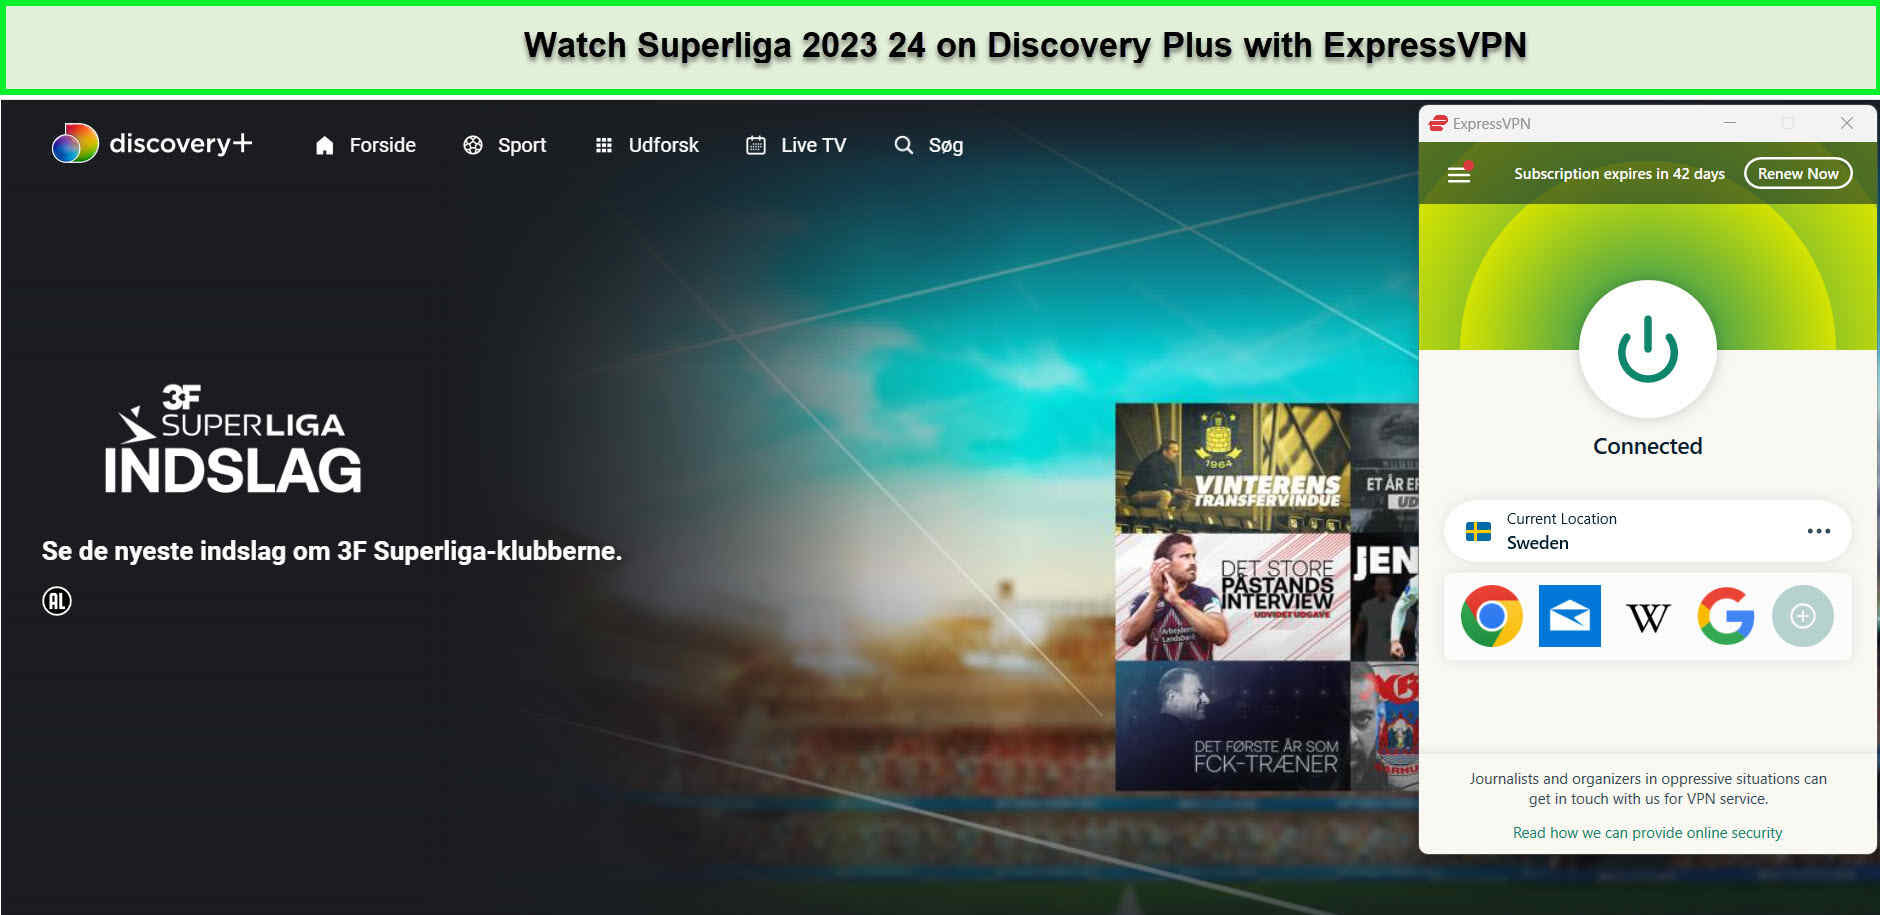 Watch-Superliga-2023-24-in-Spain-on-Discovery-Plus-with-ExpressVPN!